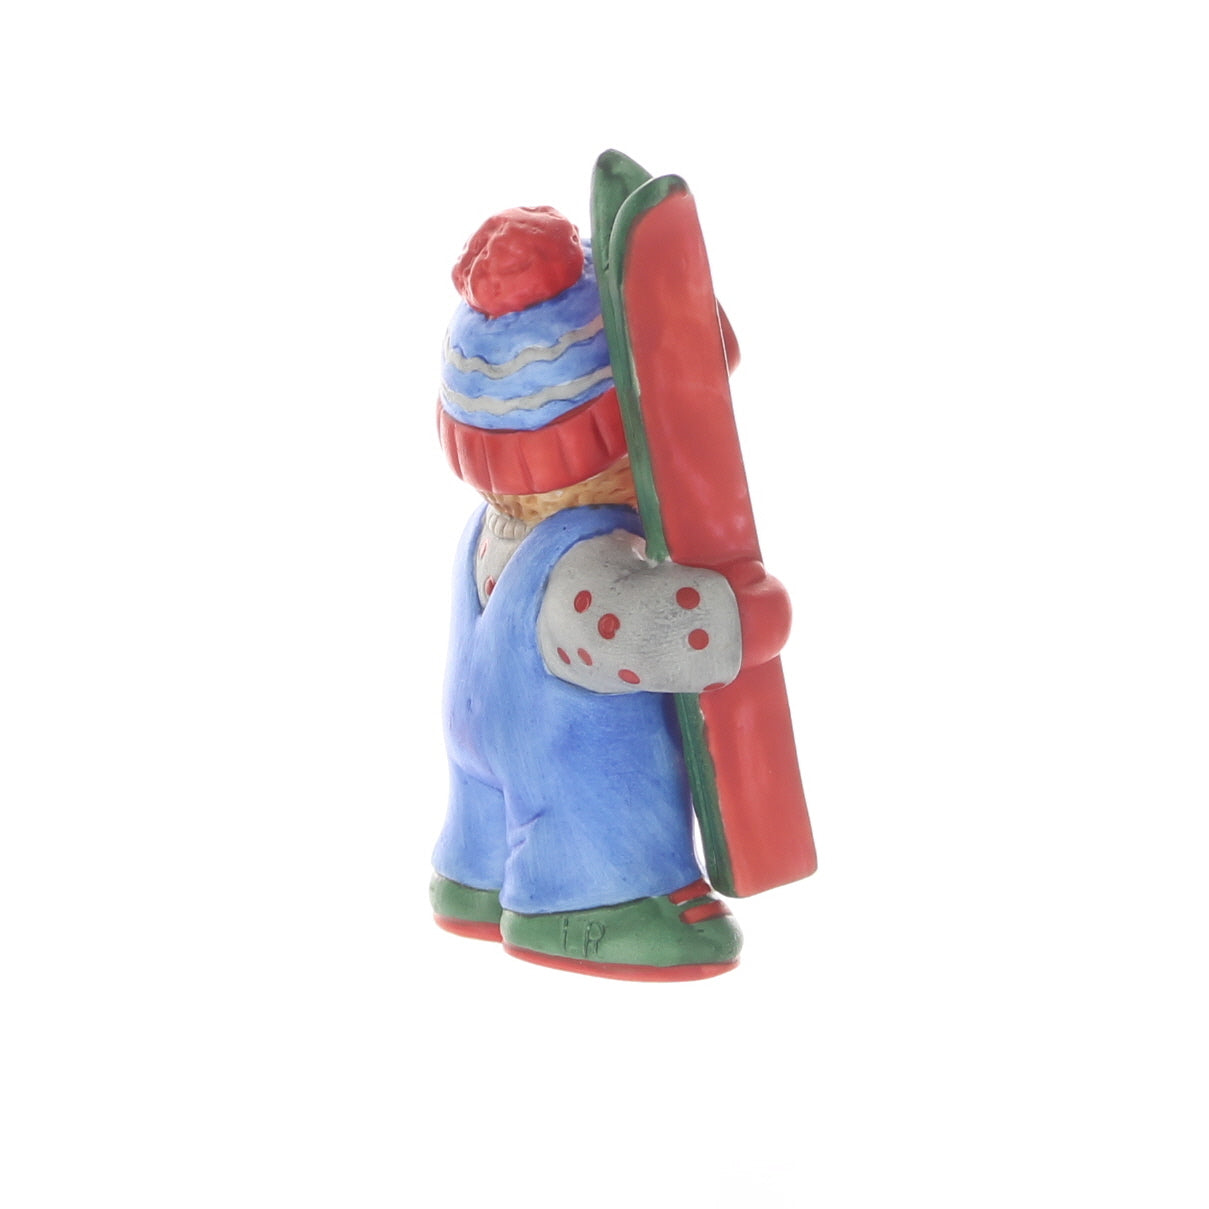 Lucy-and-Me-Porcelain-Figurine-Winter-Bear-with-Skiis